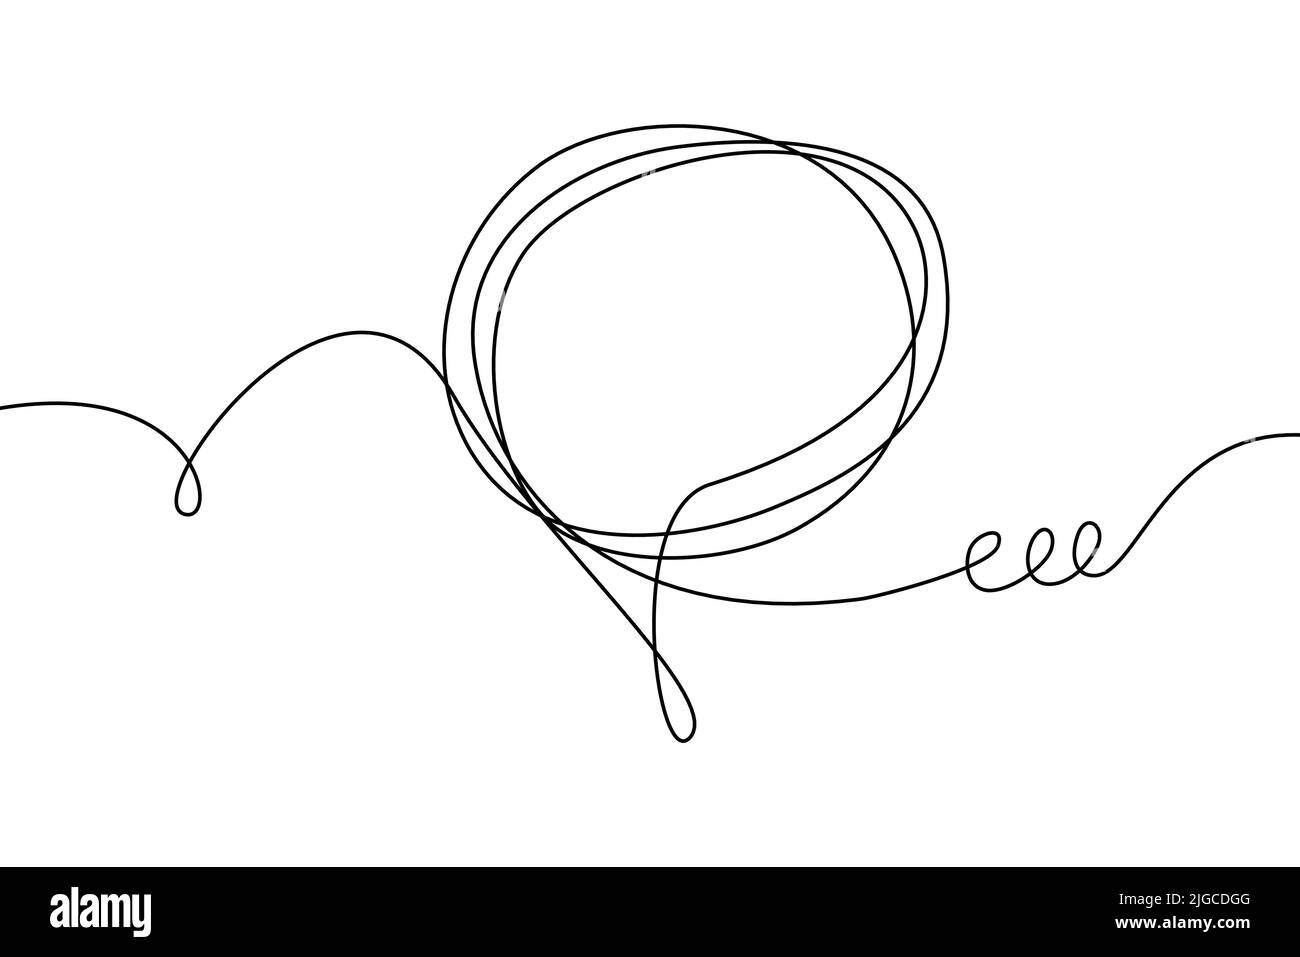 Speech bubble continuous line drawing. Black isolated linear template. Comic Doodle concept design art. Outline simple border for social media, web Stock Vector